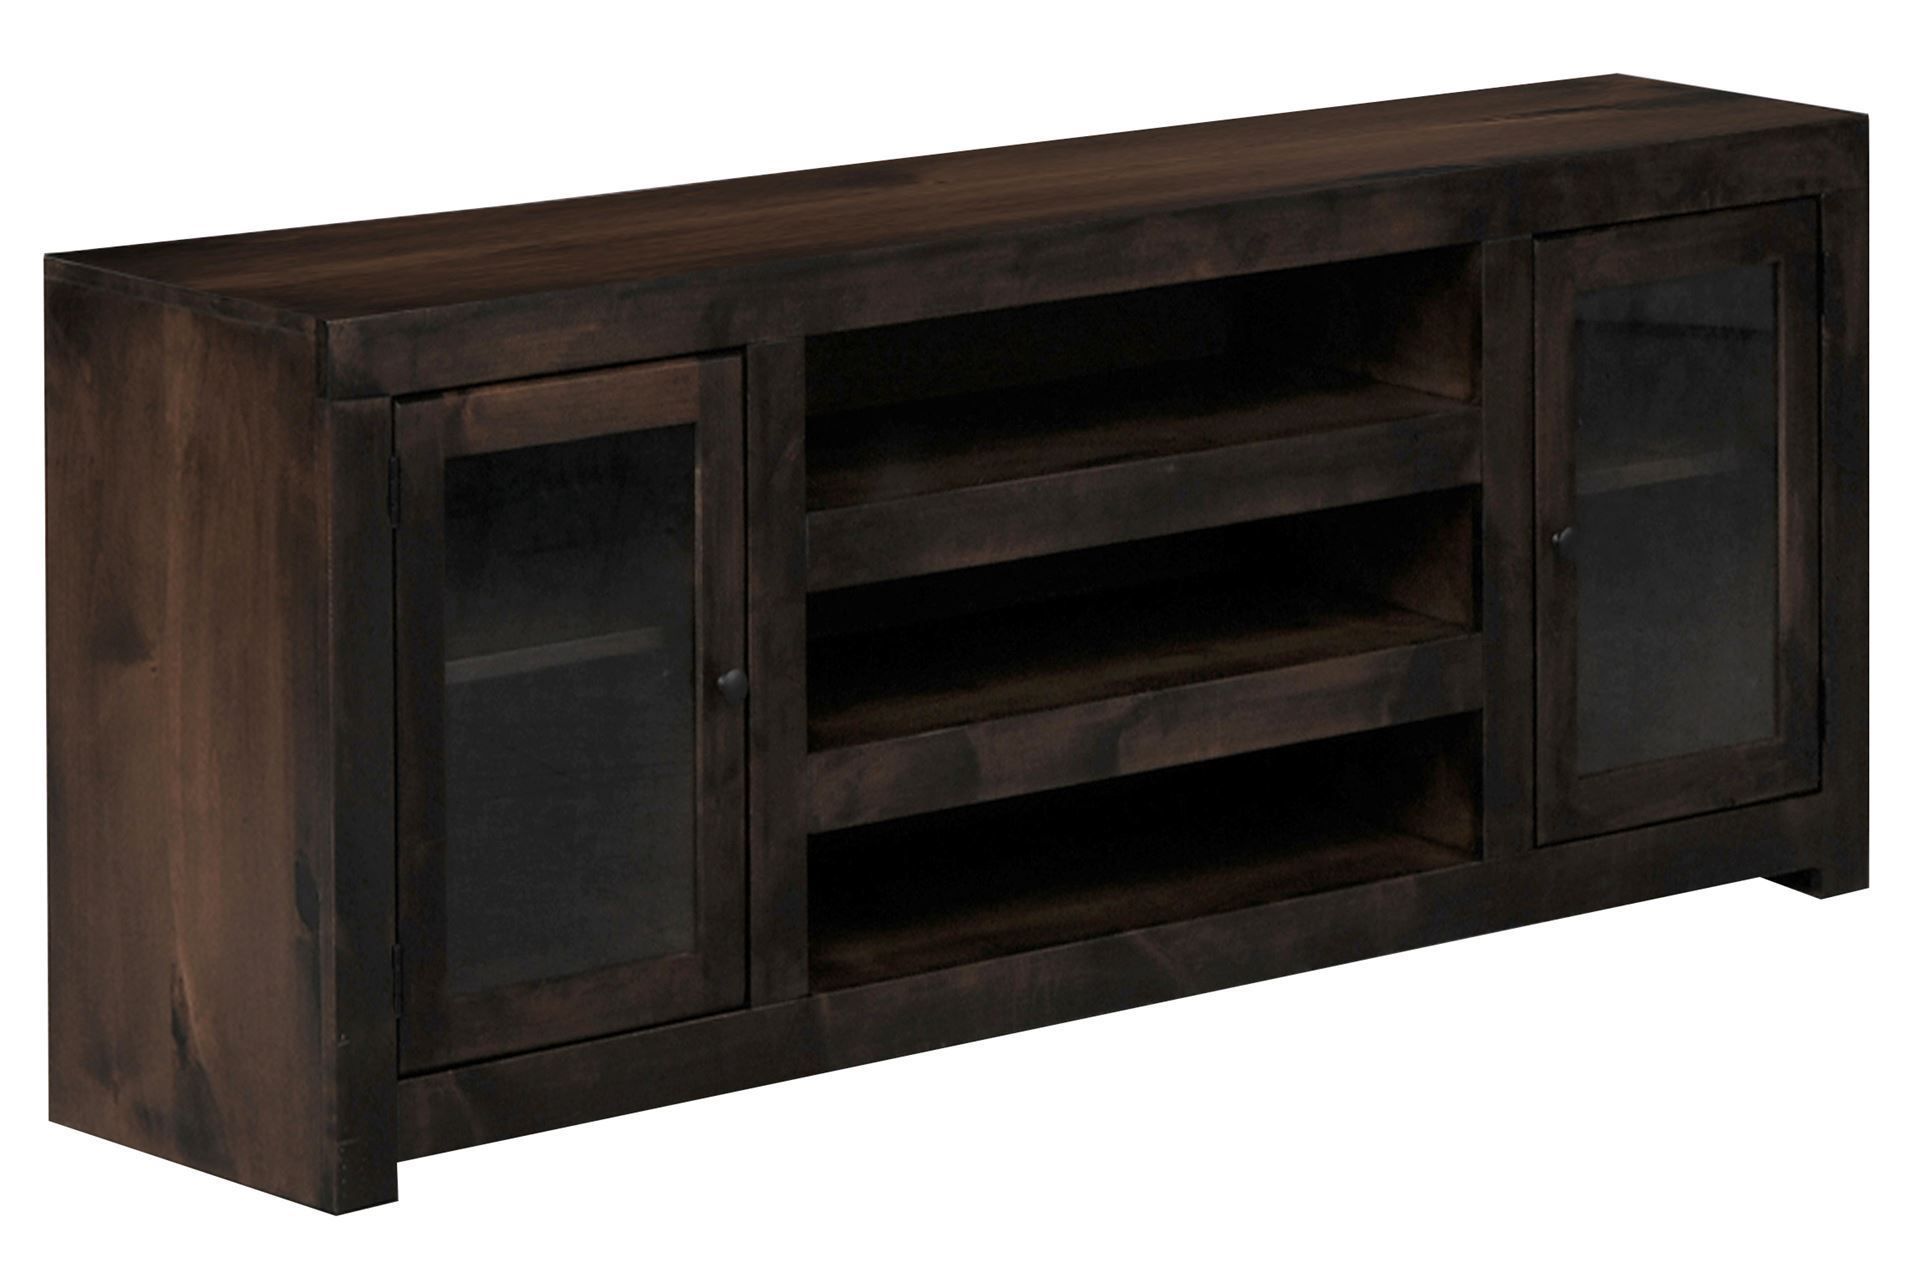 Walton 72 Inch Tv Stand | Man Cave | Pinterest | Tvs, Console And Inside Walton 72 Inch Tv Stands (View 1 of 30)